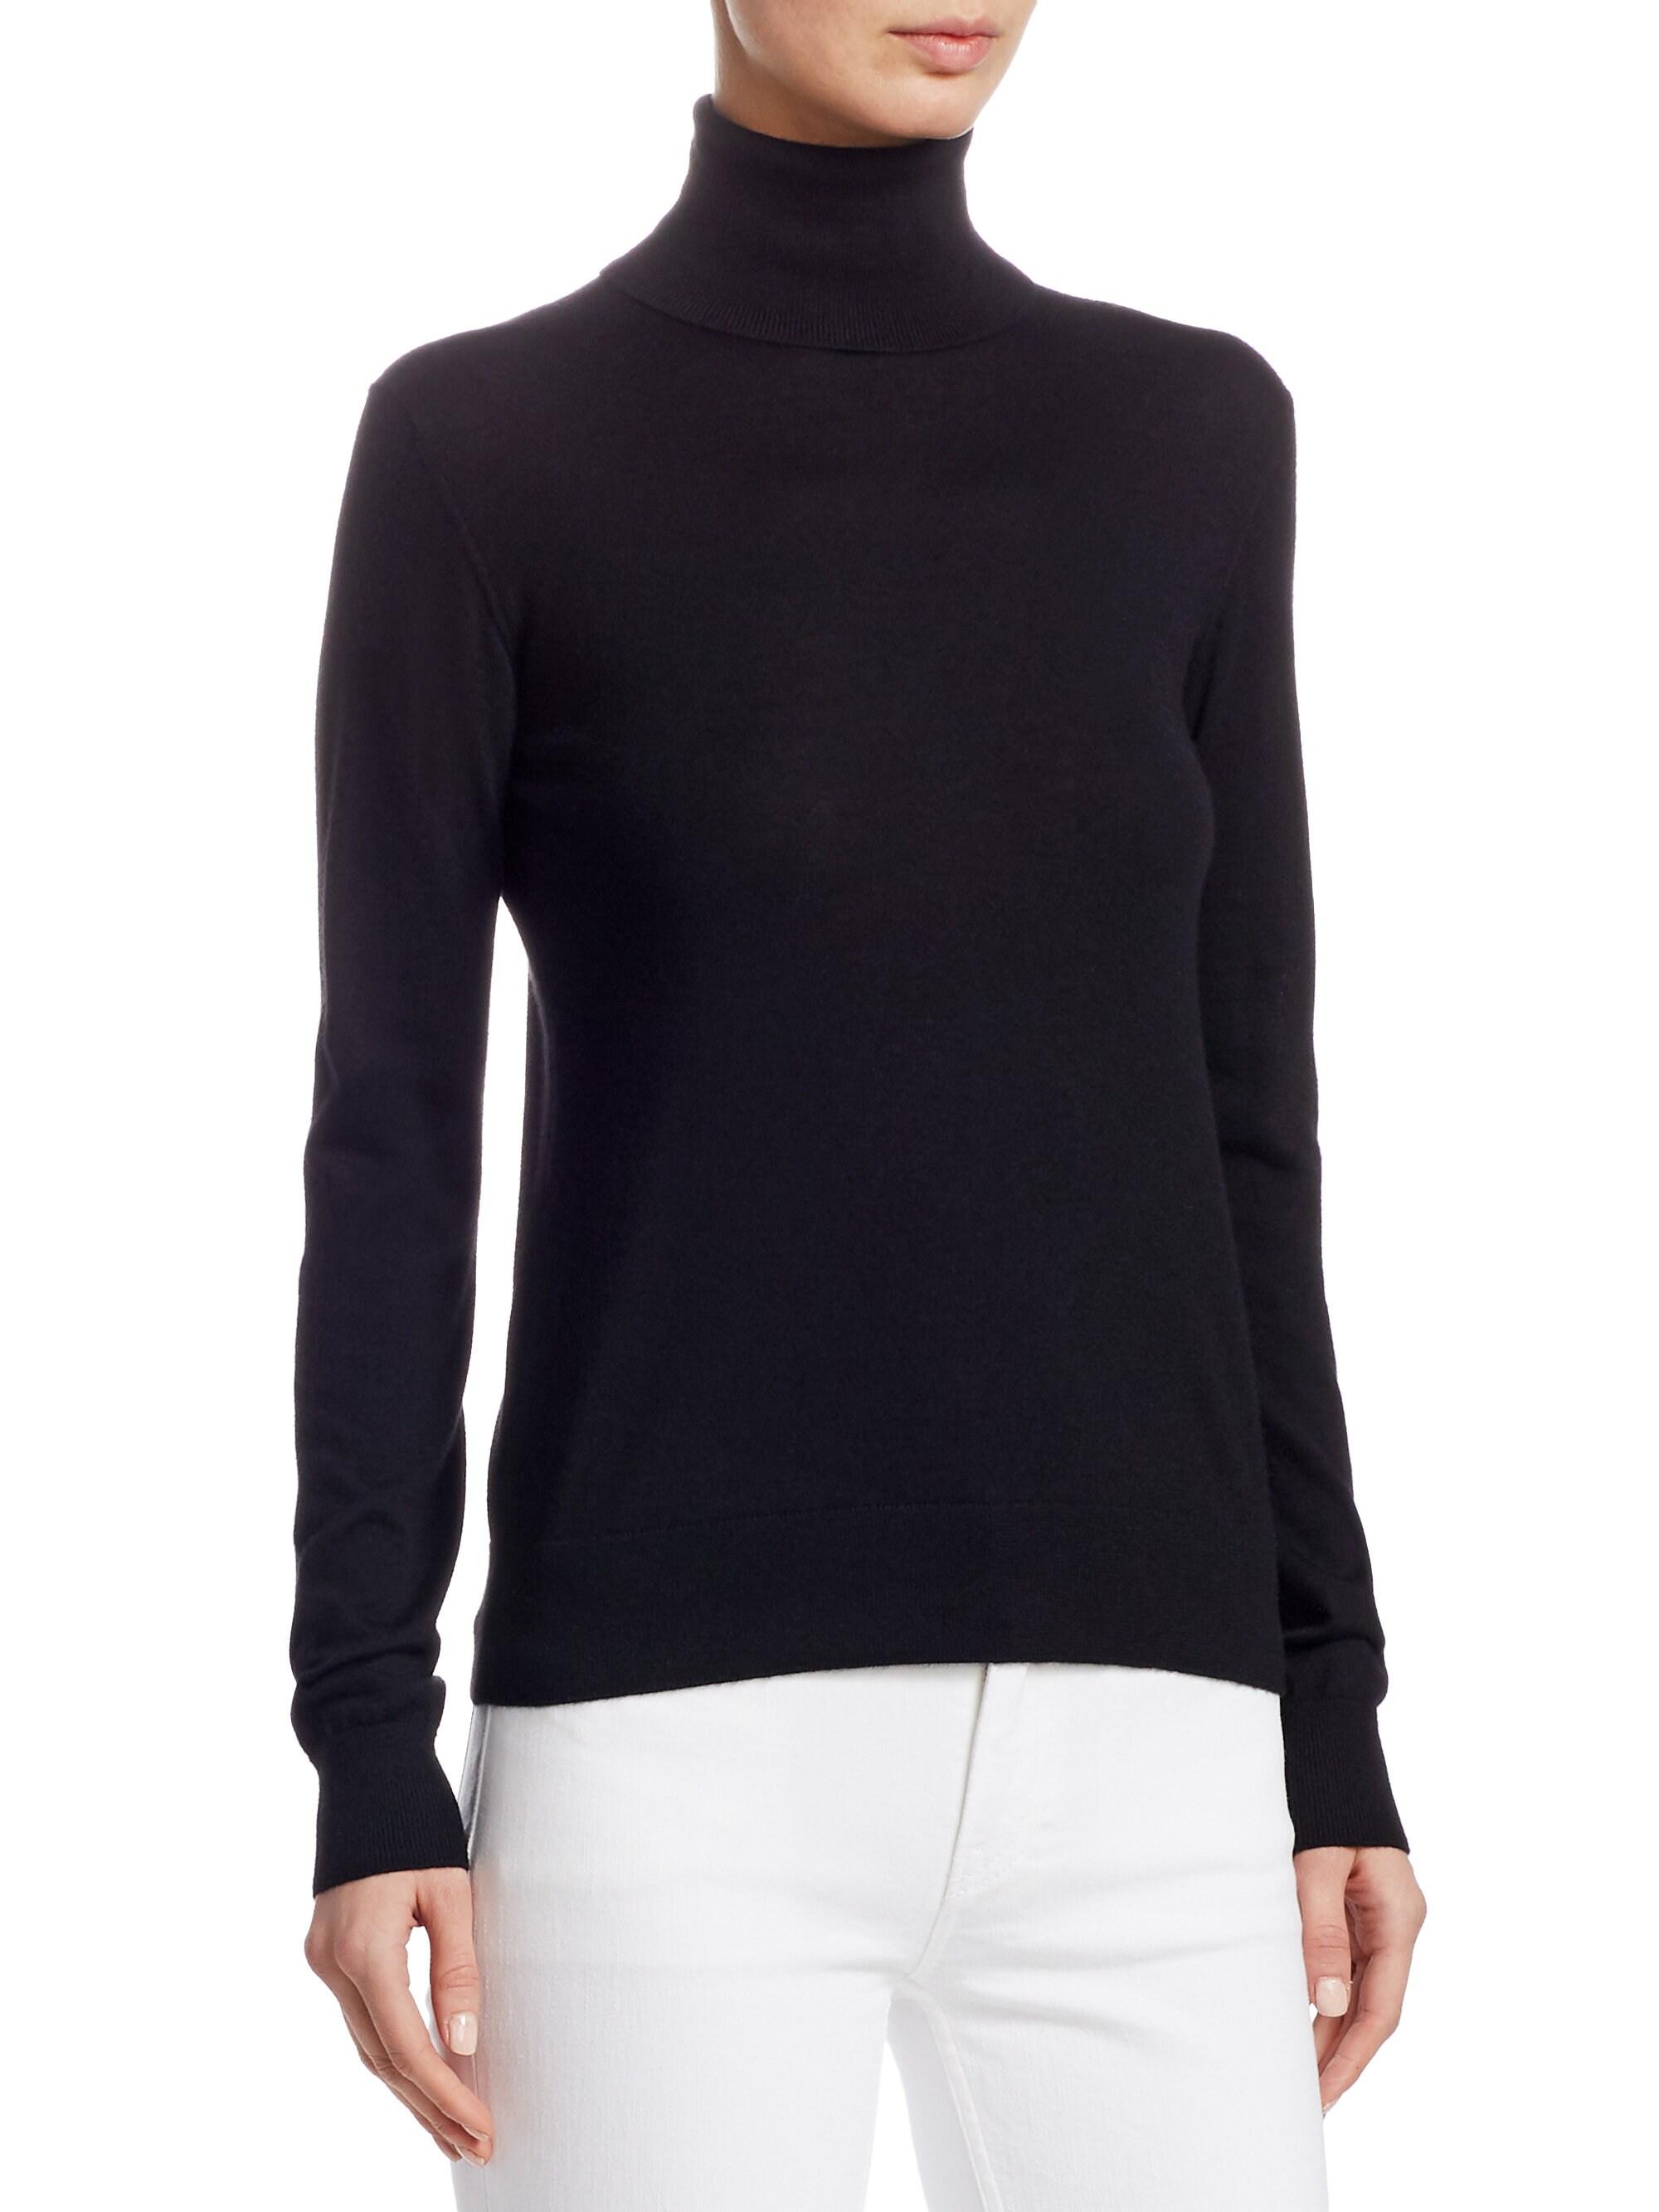 Ralph Lauren Collection Iconic Style Cashmere Turtleneck Sweater in ...